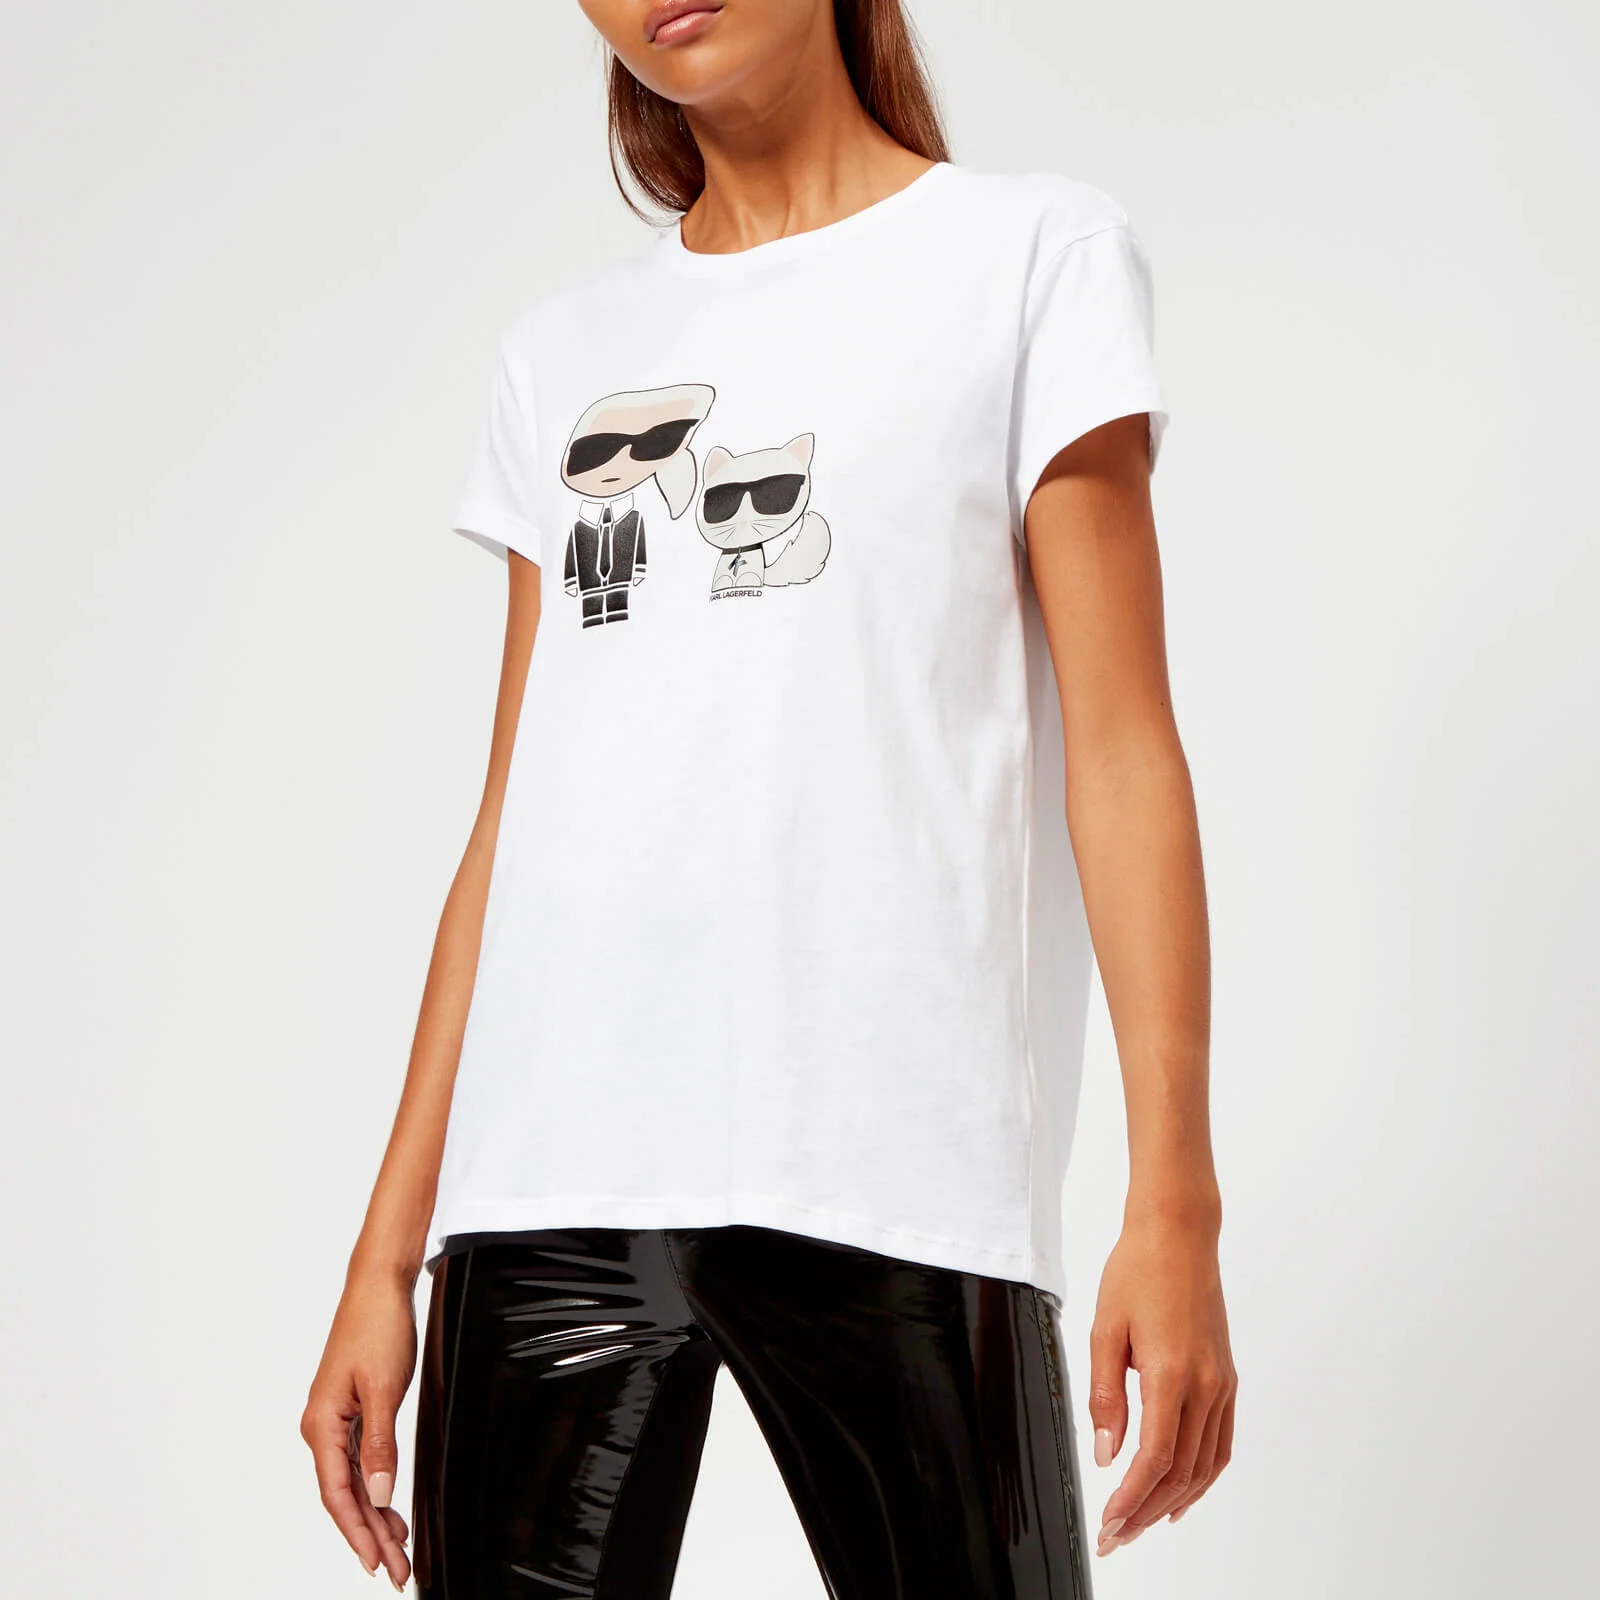 Karl Lagerfeld Women's Karl and Choupette T-Shirt - White Image 1